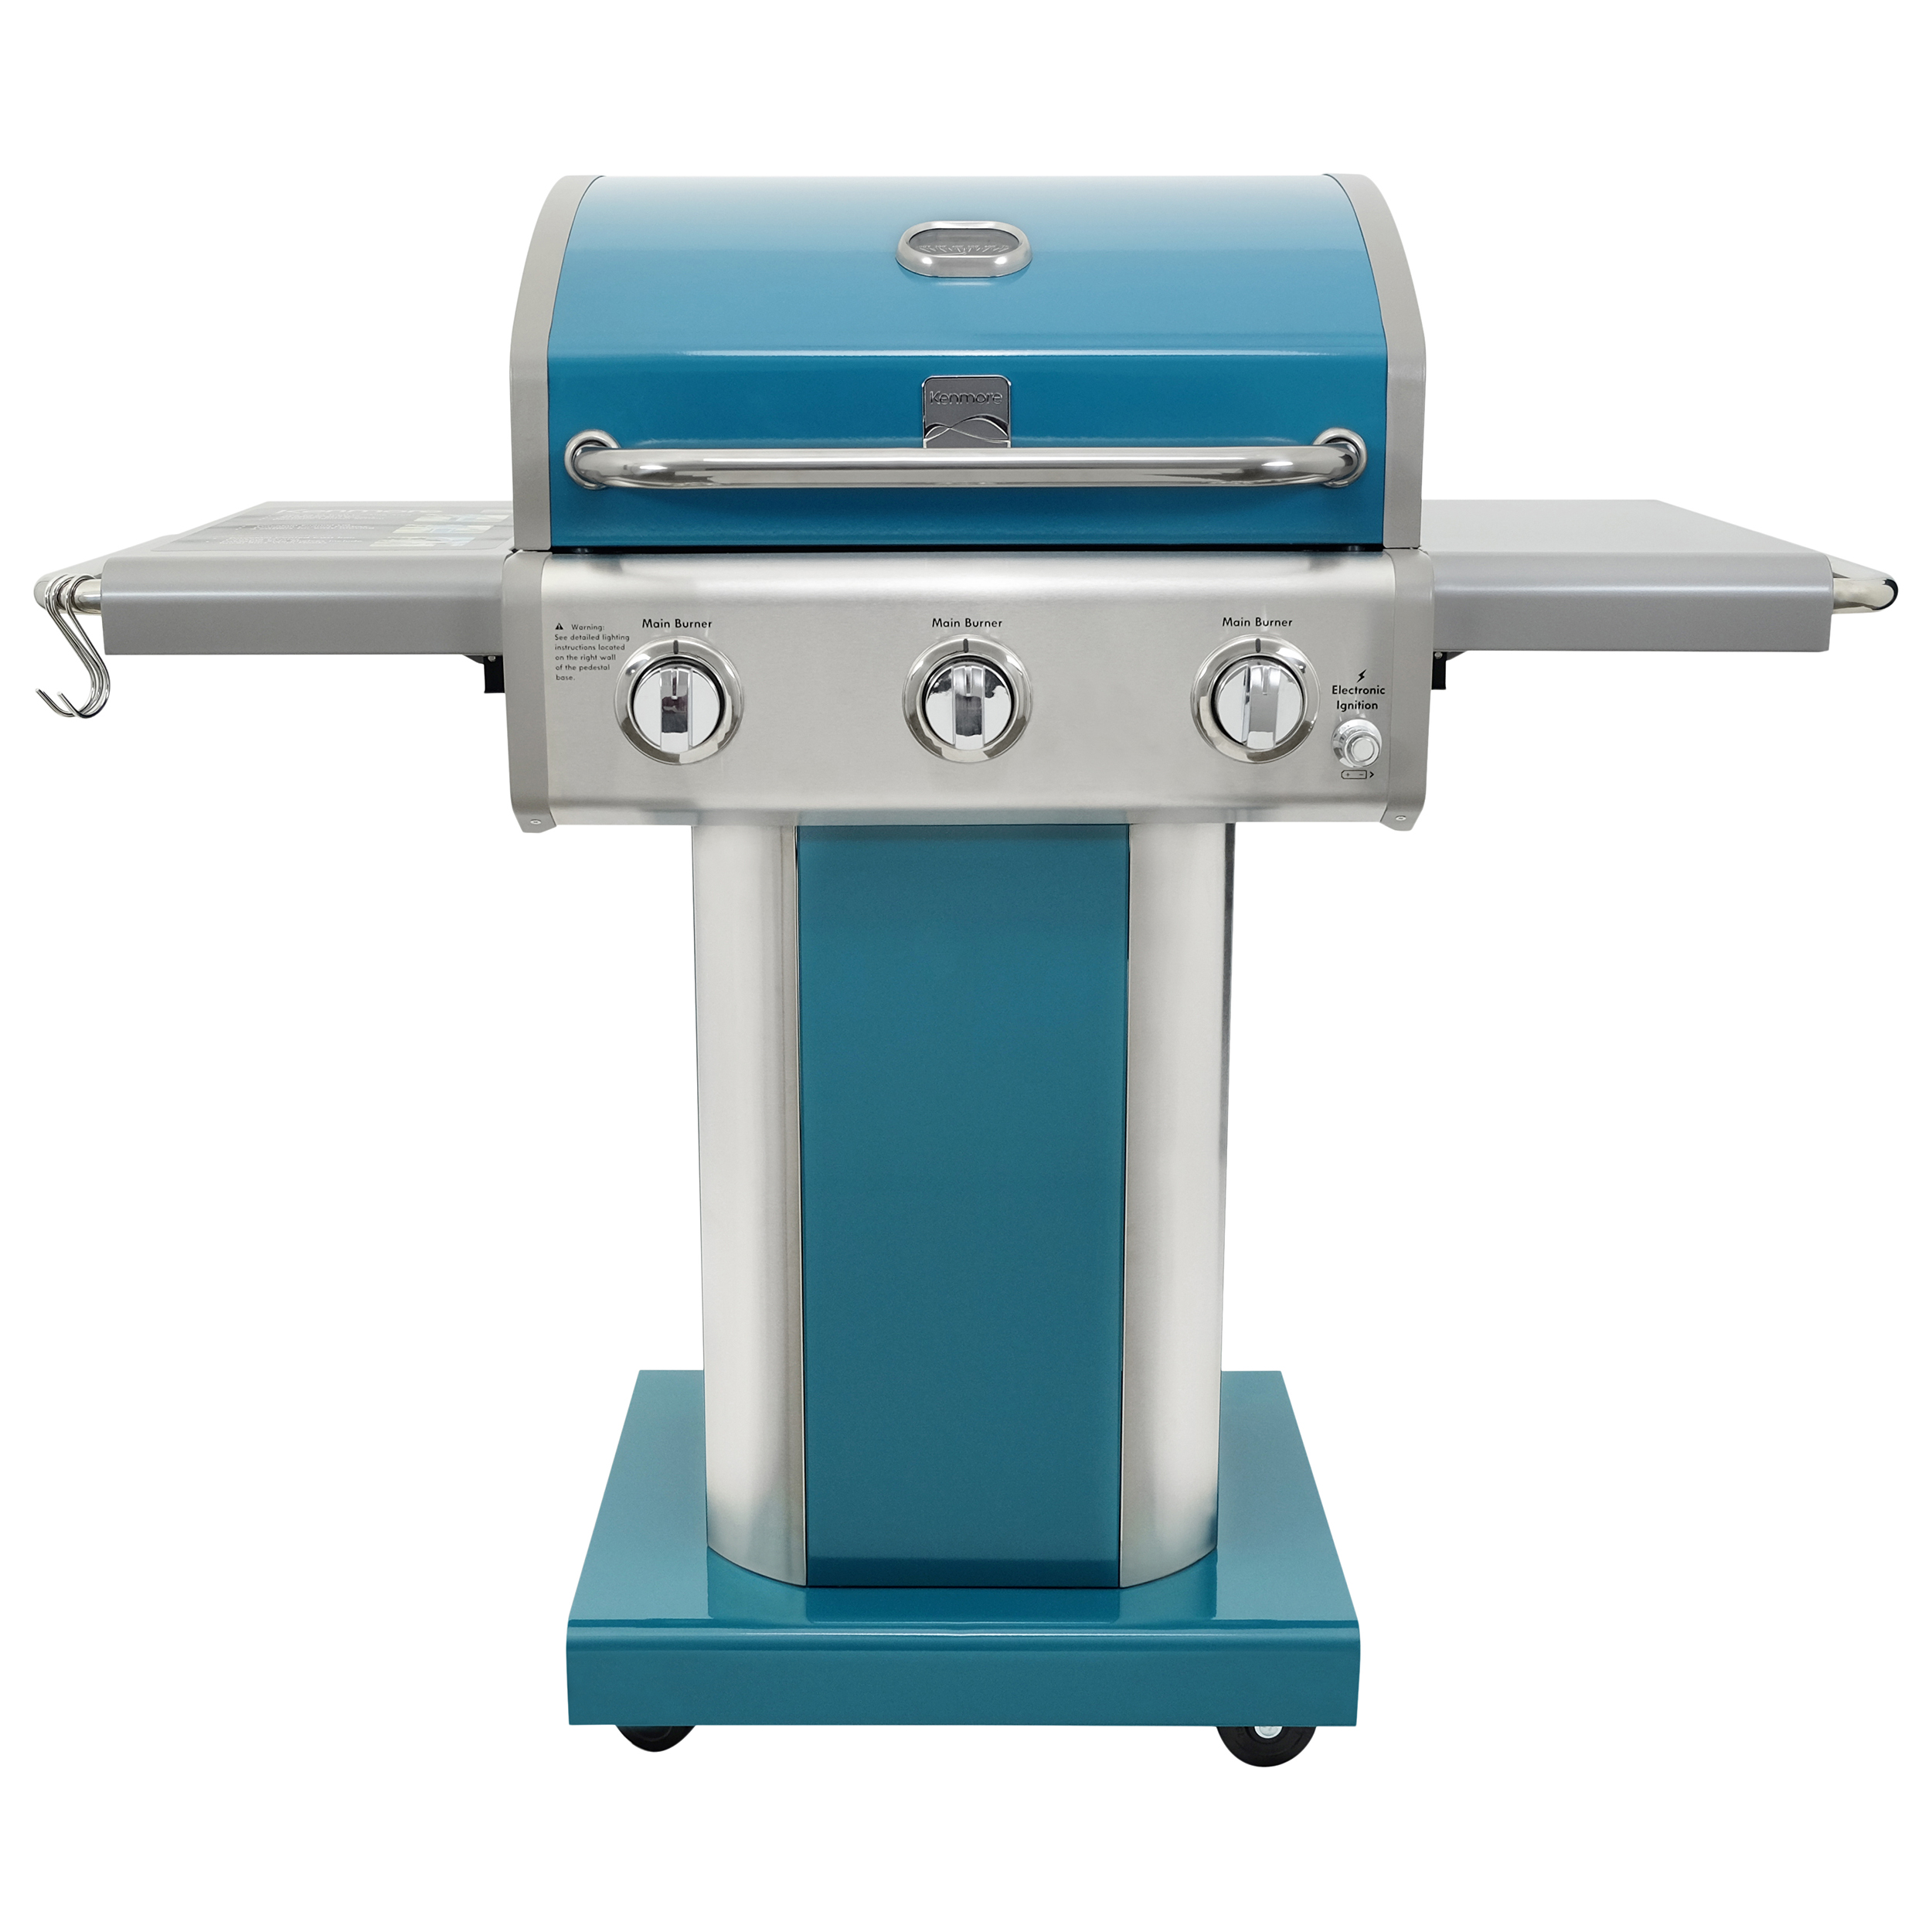 Kenmore 3-Burner Gas Grill, Outdoor BBQ Grill, Propane Grill with Foldable Side Tables, Teal Green - image 1 of 12